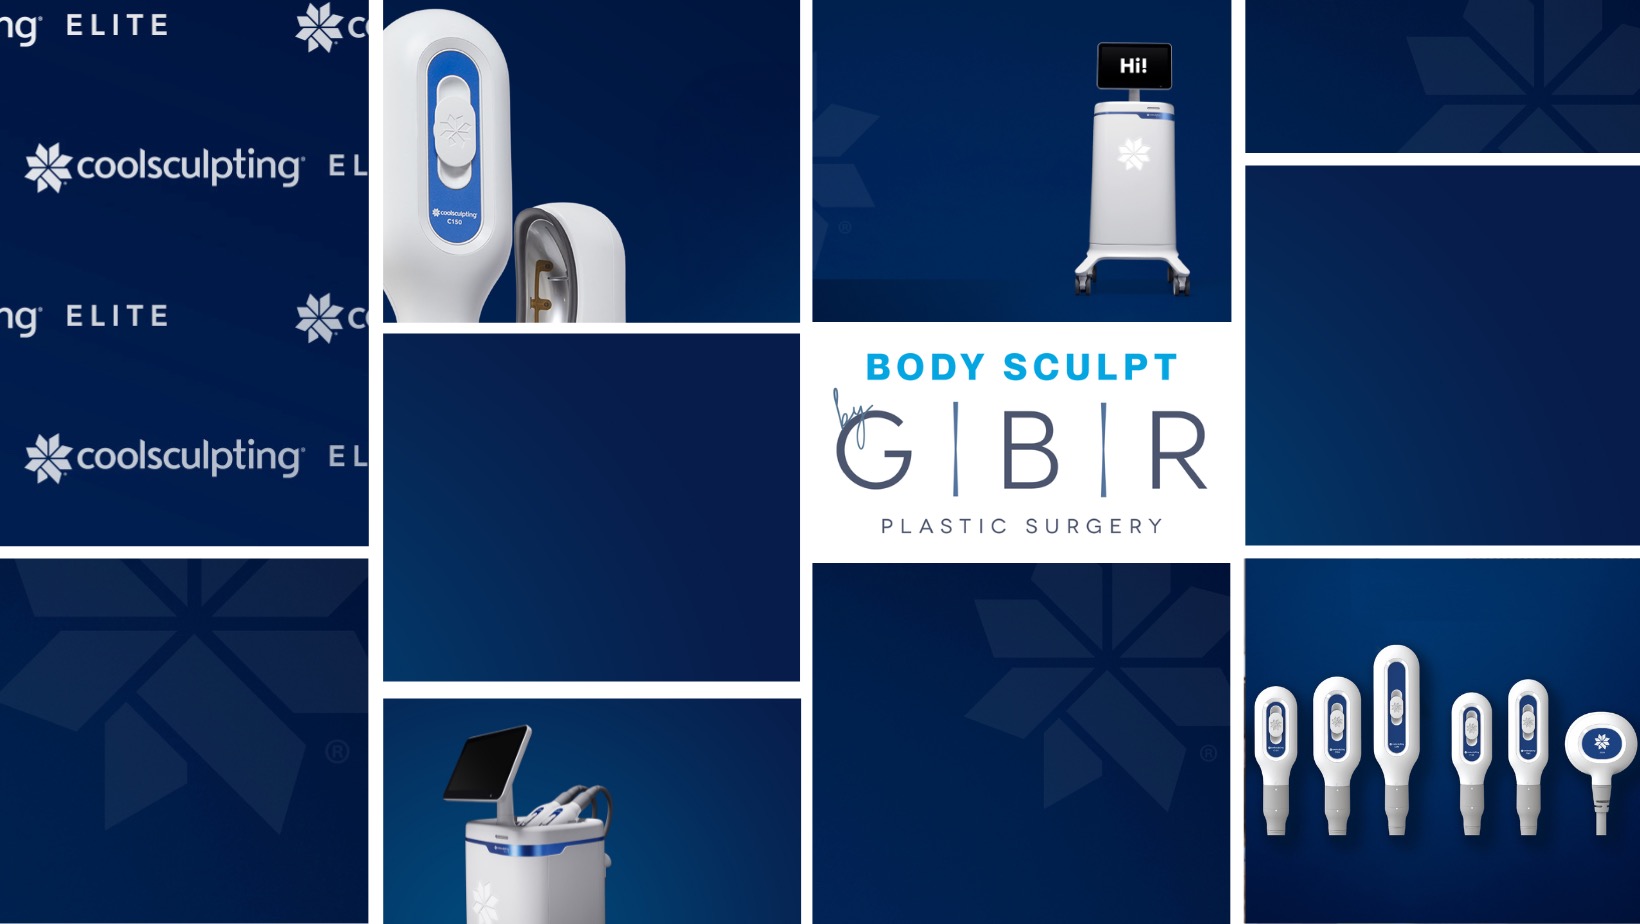 Body Sculpt by GBR graphic